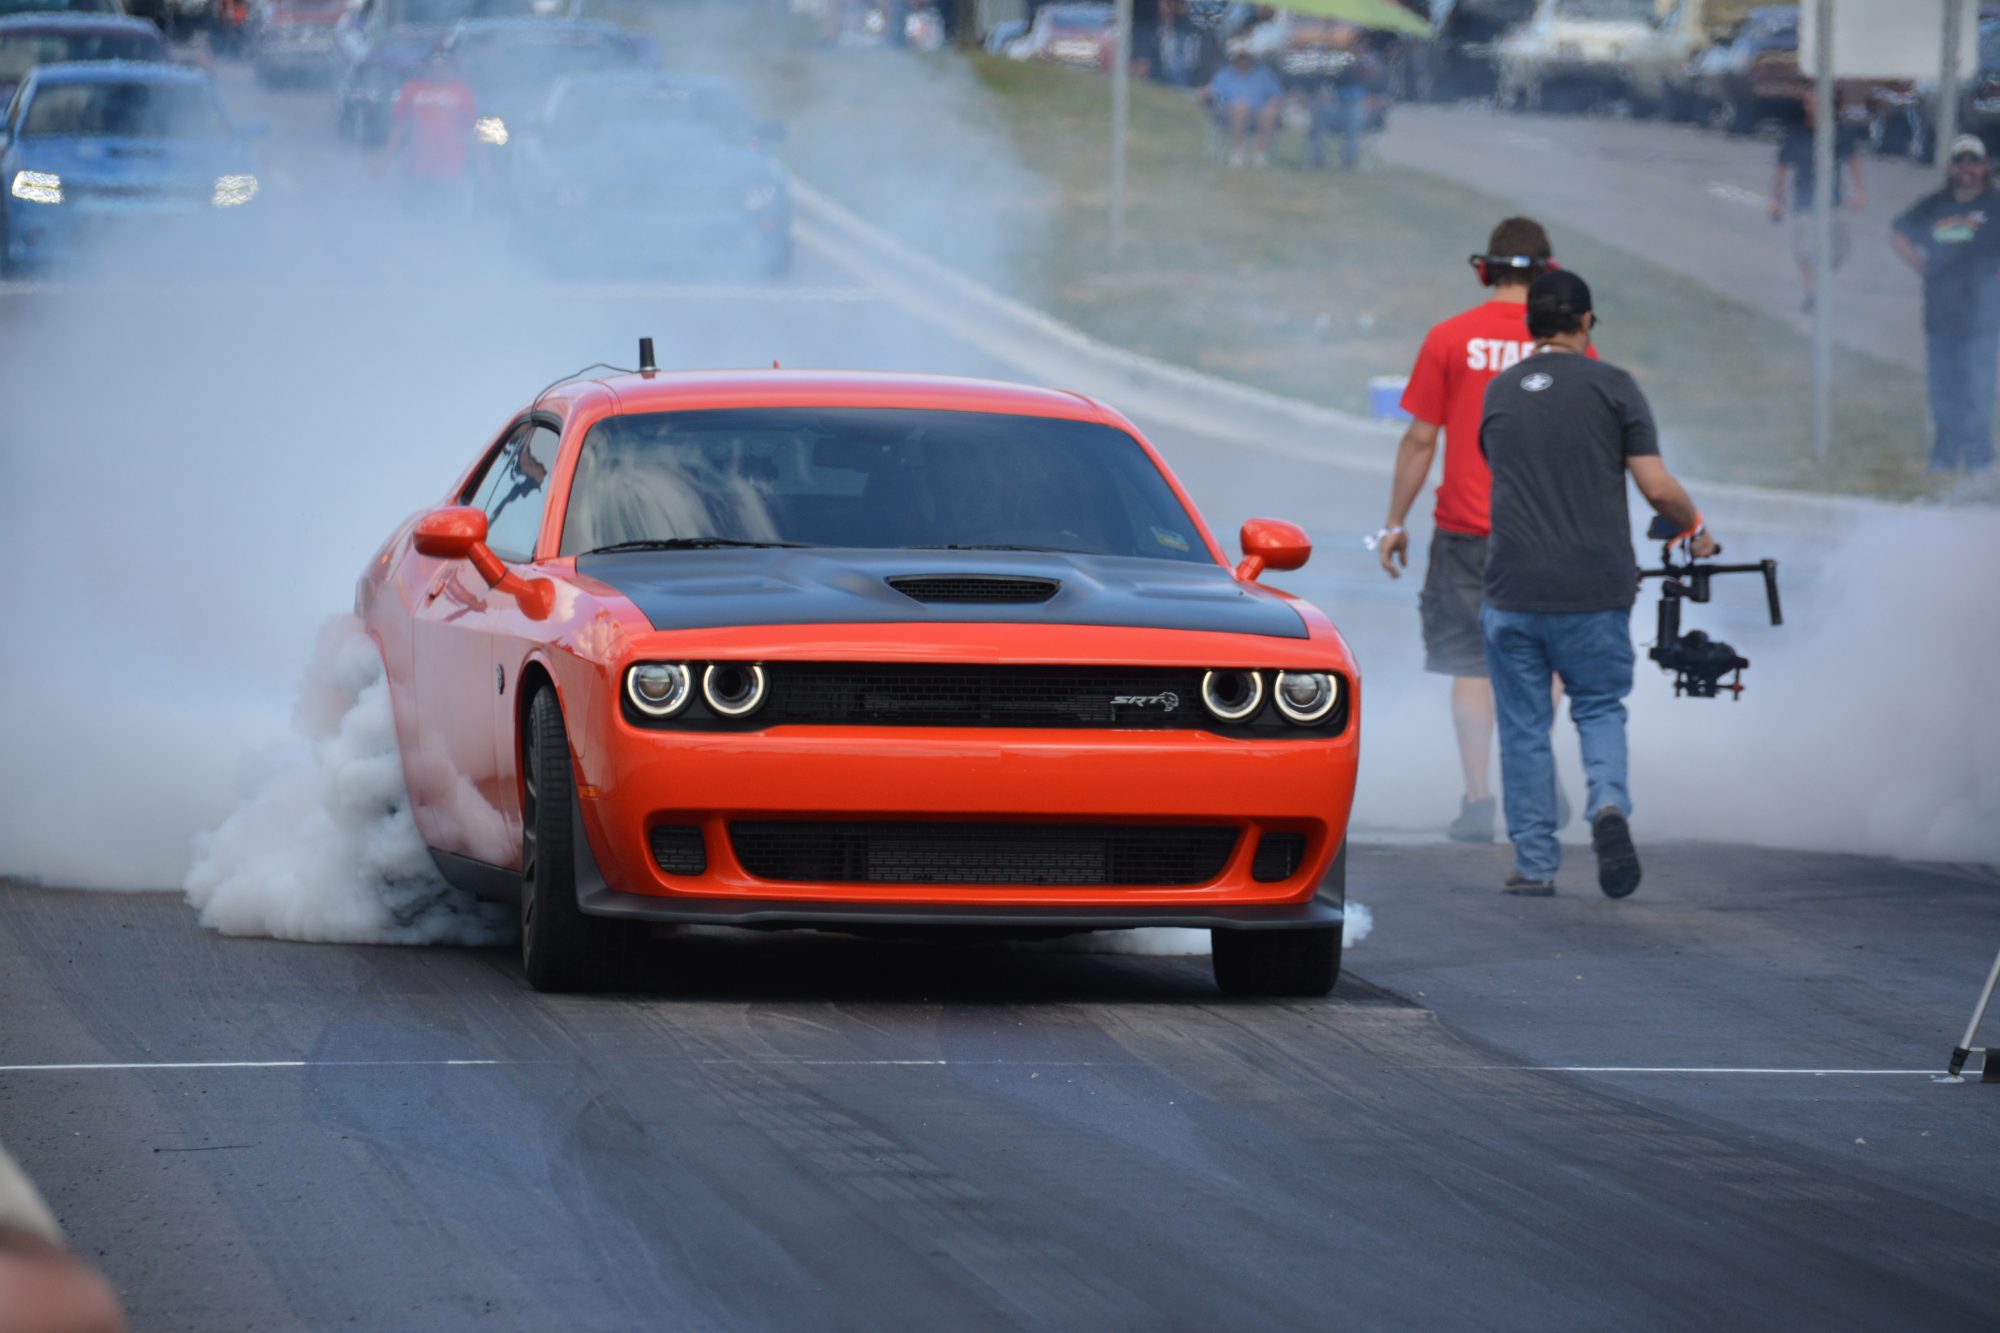 Challenger doing a burnout prior to drag racing